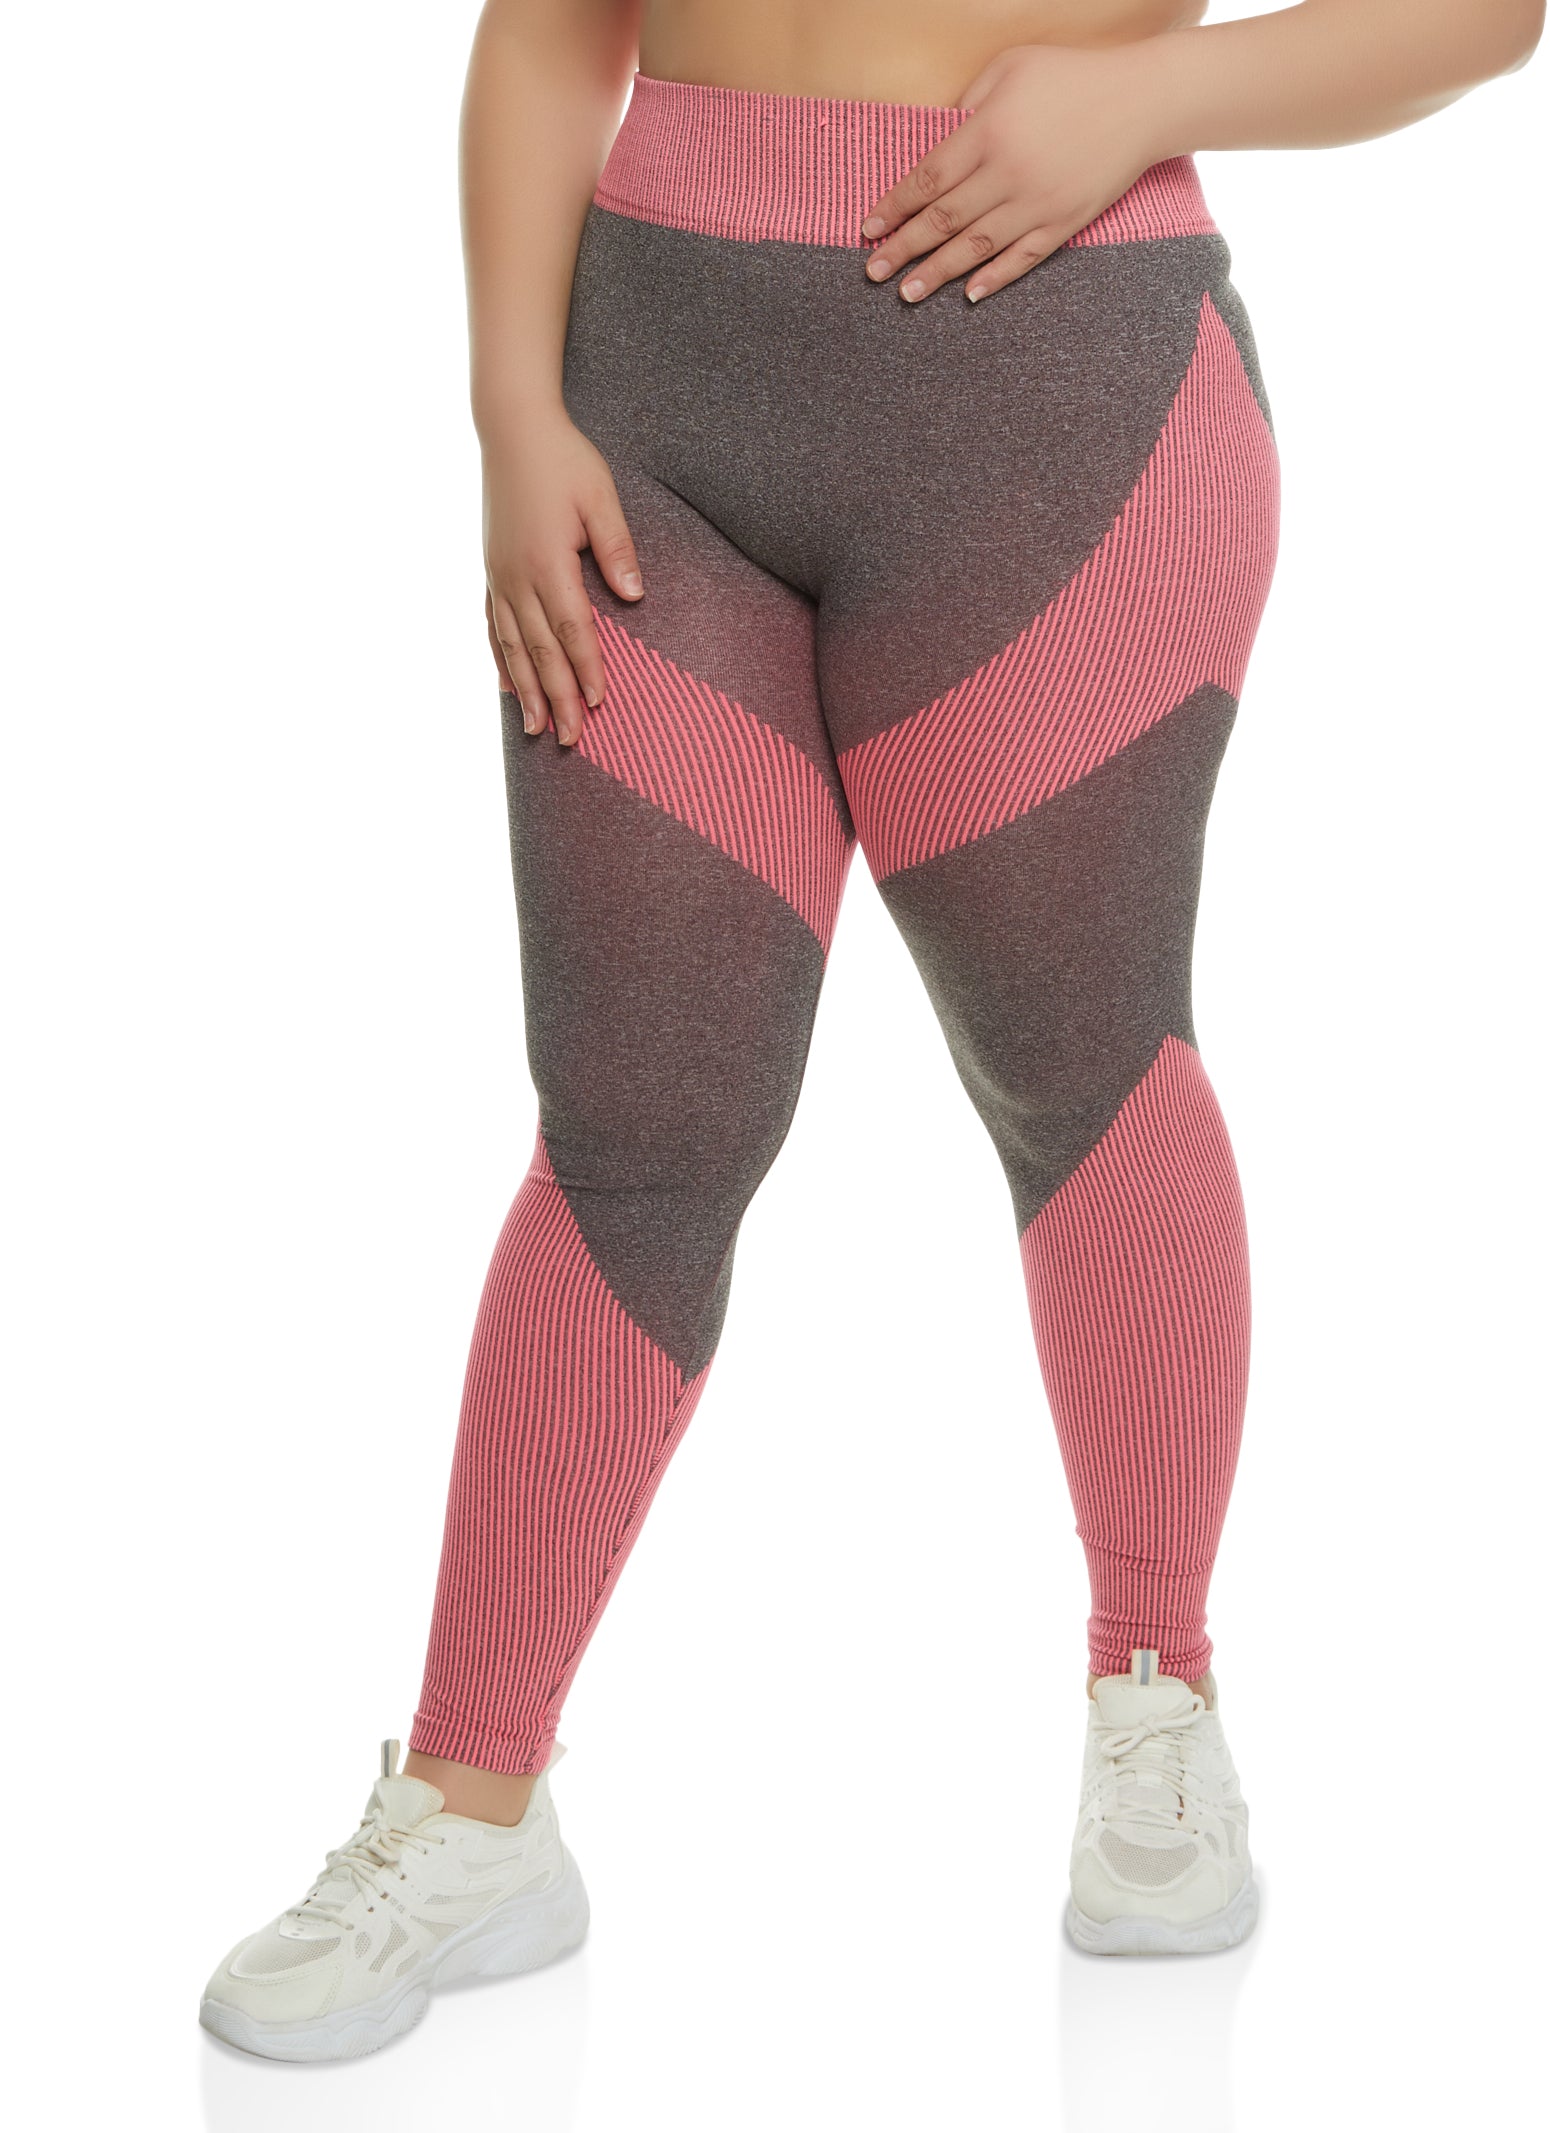 Plus Size Pink Leggings, Everyday Low Prices